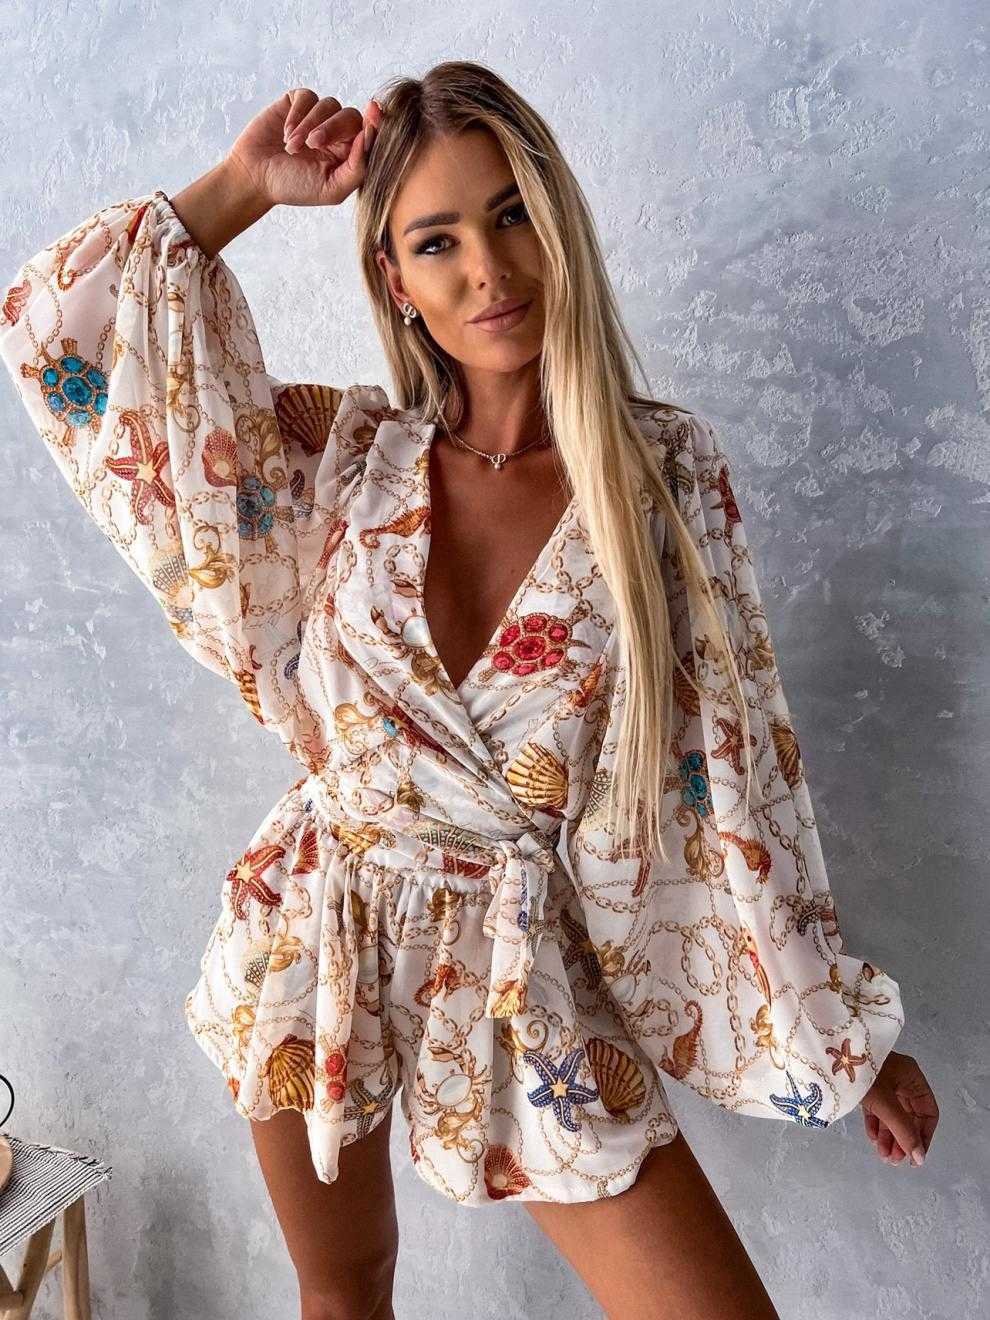 Women's Two Piece Pants Casual Beach Print Lace Up Two Piece Set Women Summer Chiffon Shirt Shorts Suit Fall Sexy V-neck Top Sets Womens Outfits T221012